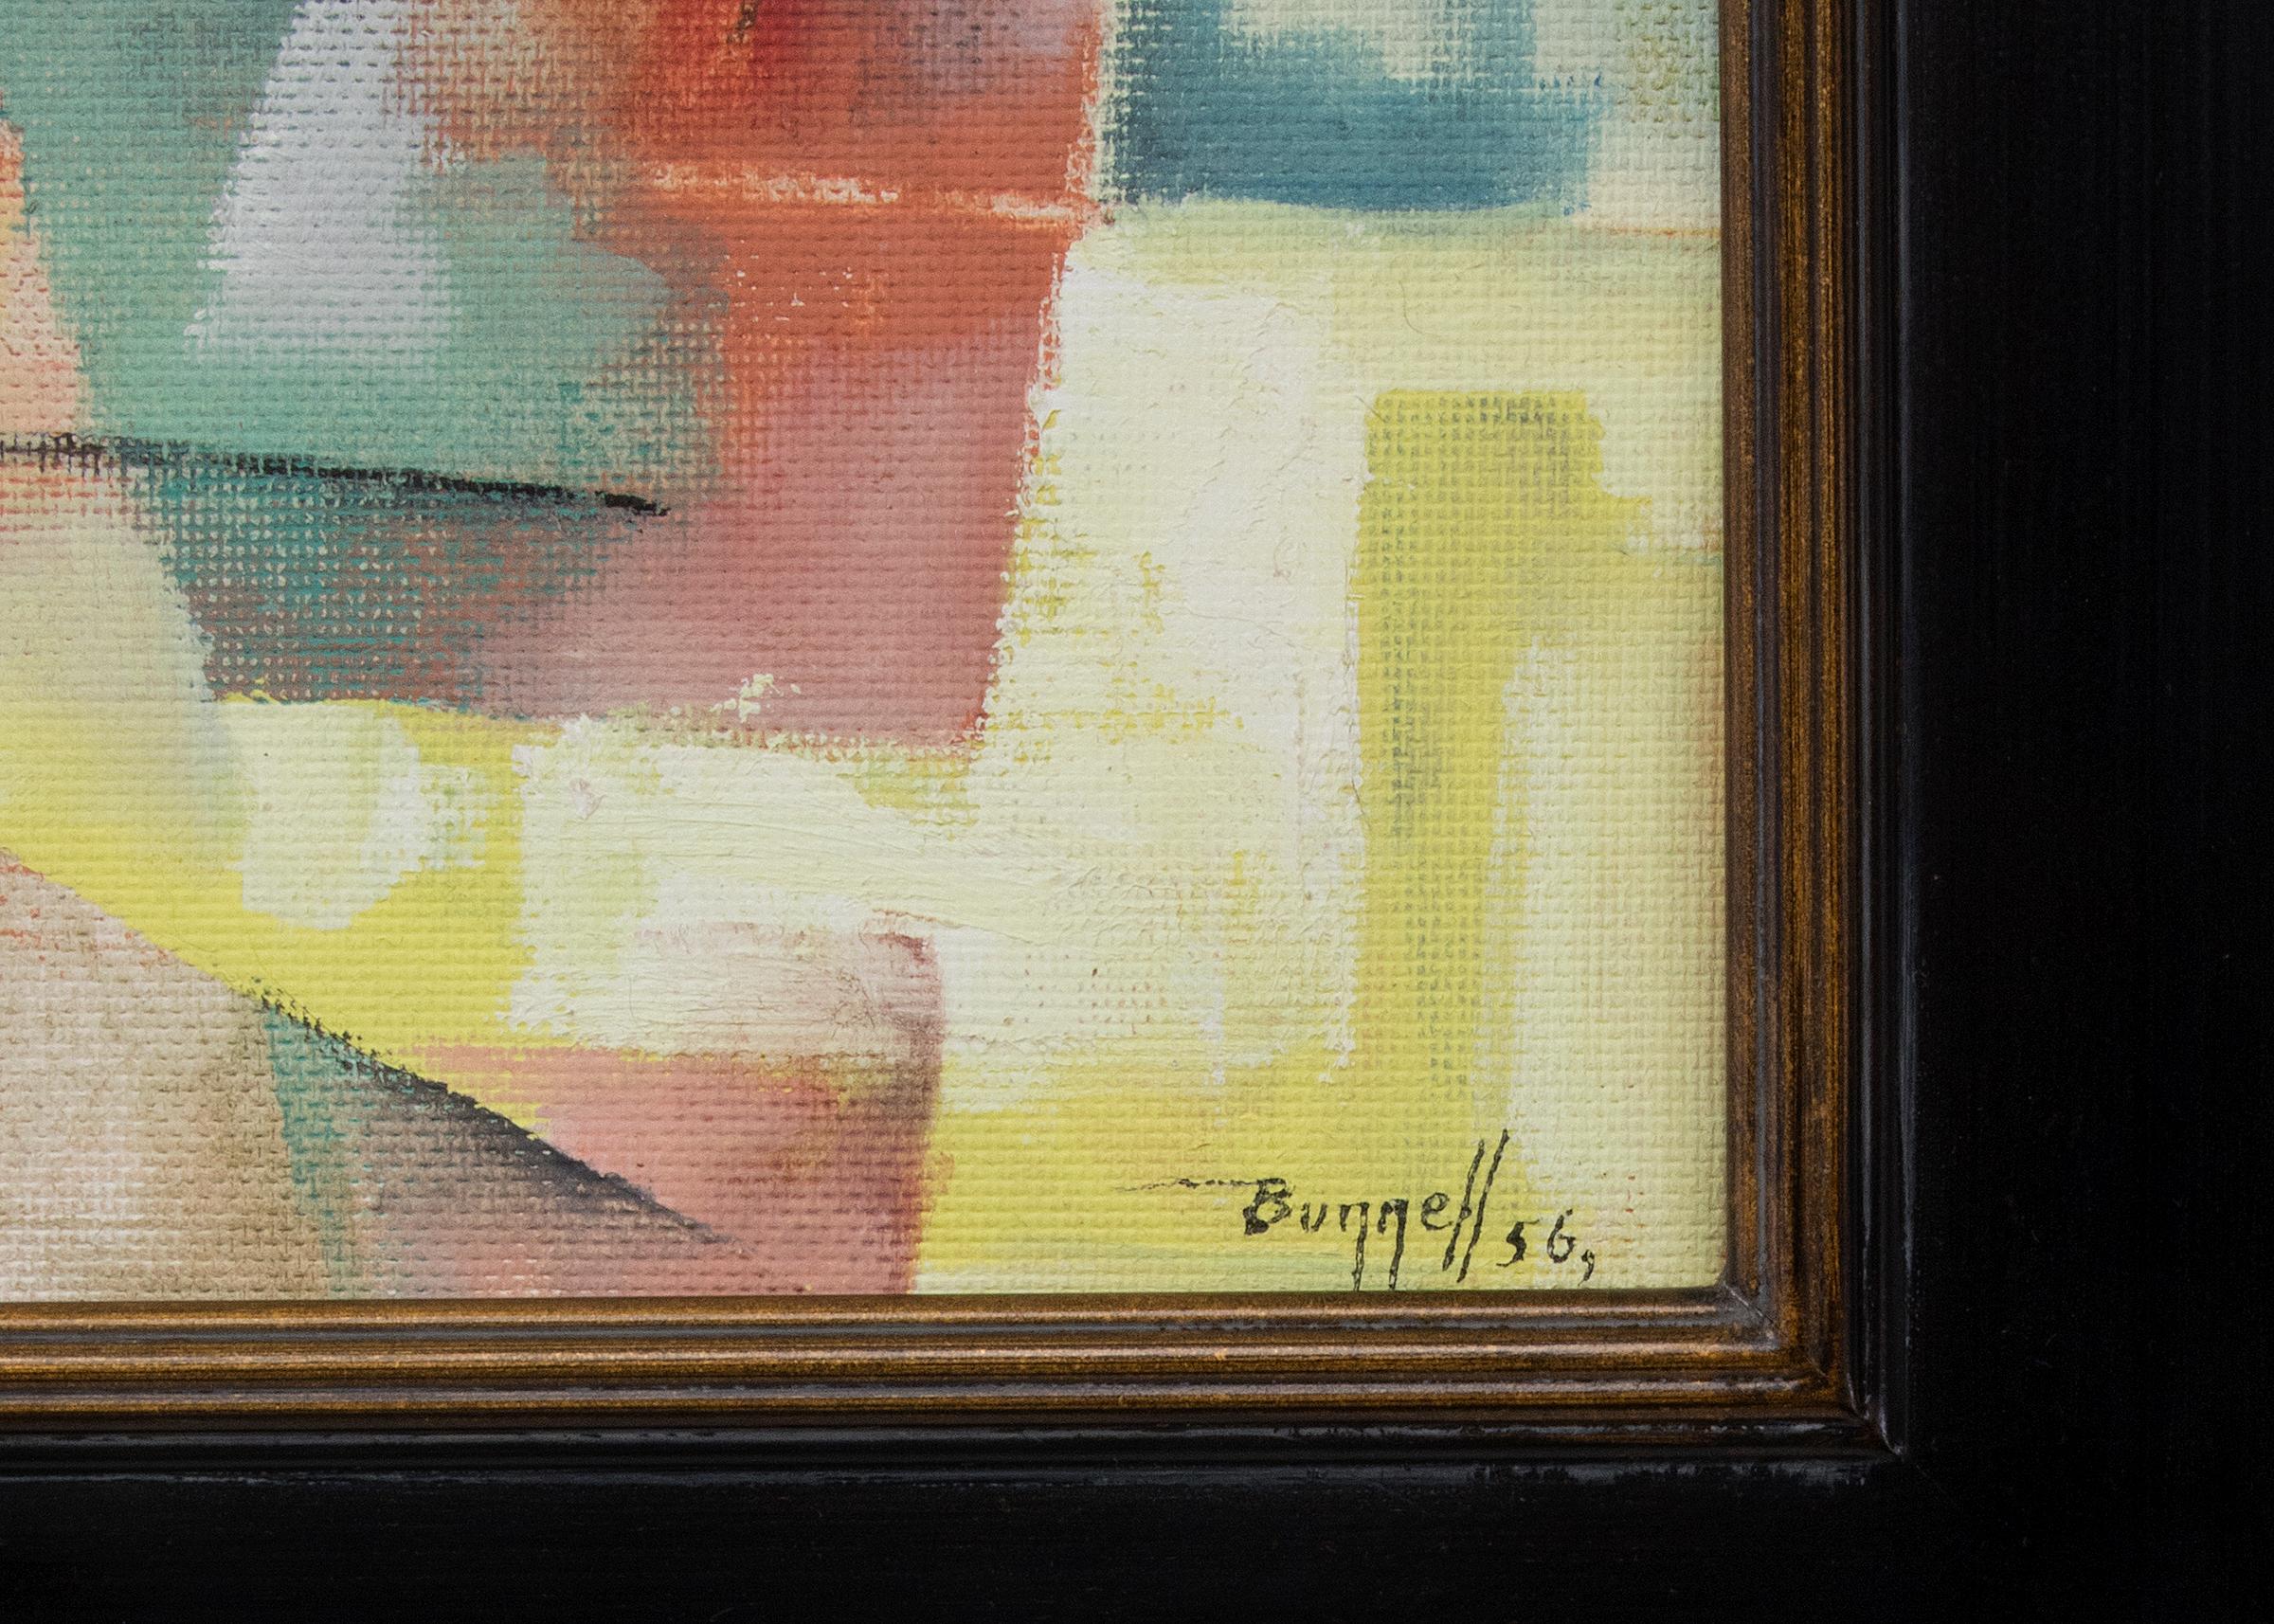 Vintage 1956 Abstract Expressionist painting by 20th century Colorado artist, Charles Bunnell (1897-1968). Painted in colors of yellow, teal blue, coral (pink/red), pale green and creamy white. Presented in a custom brown wood frame, outer